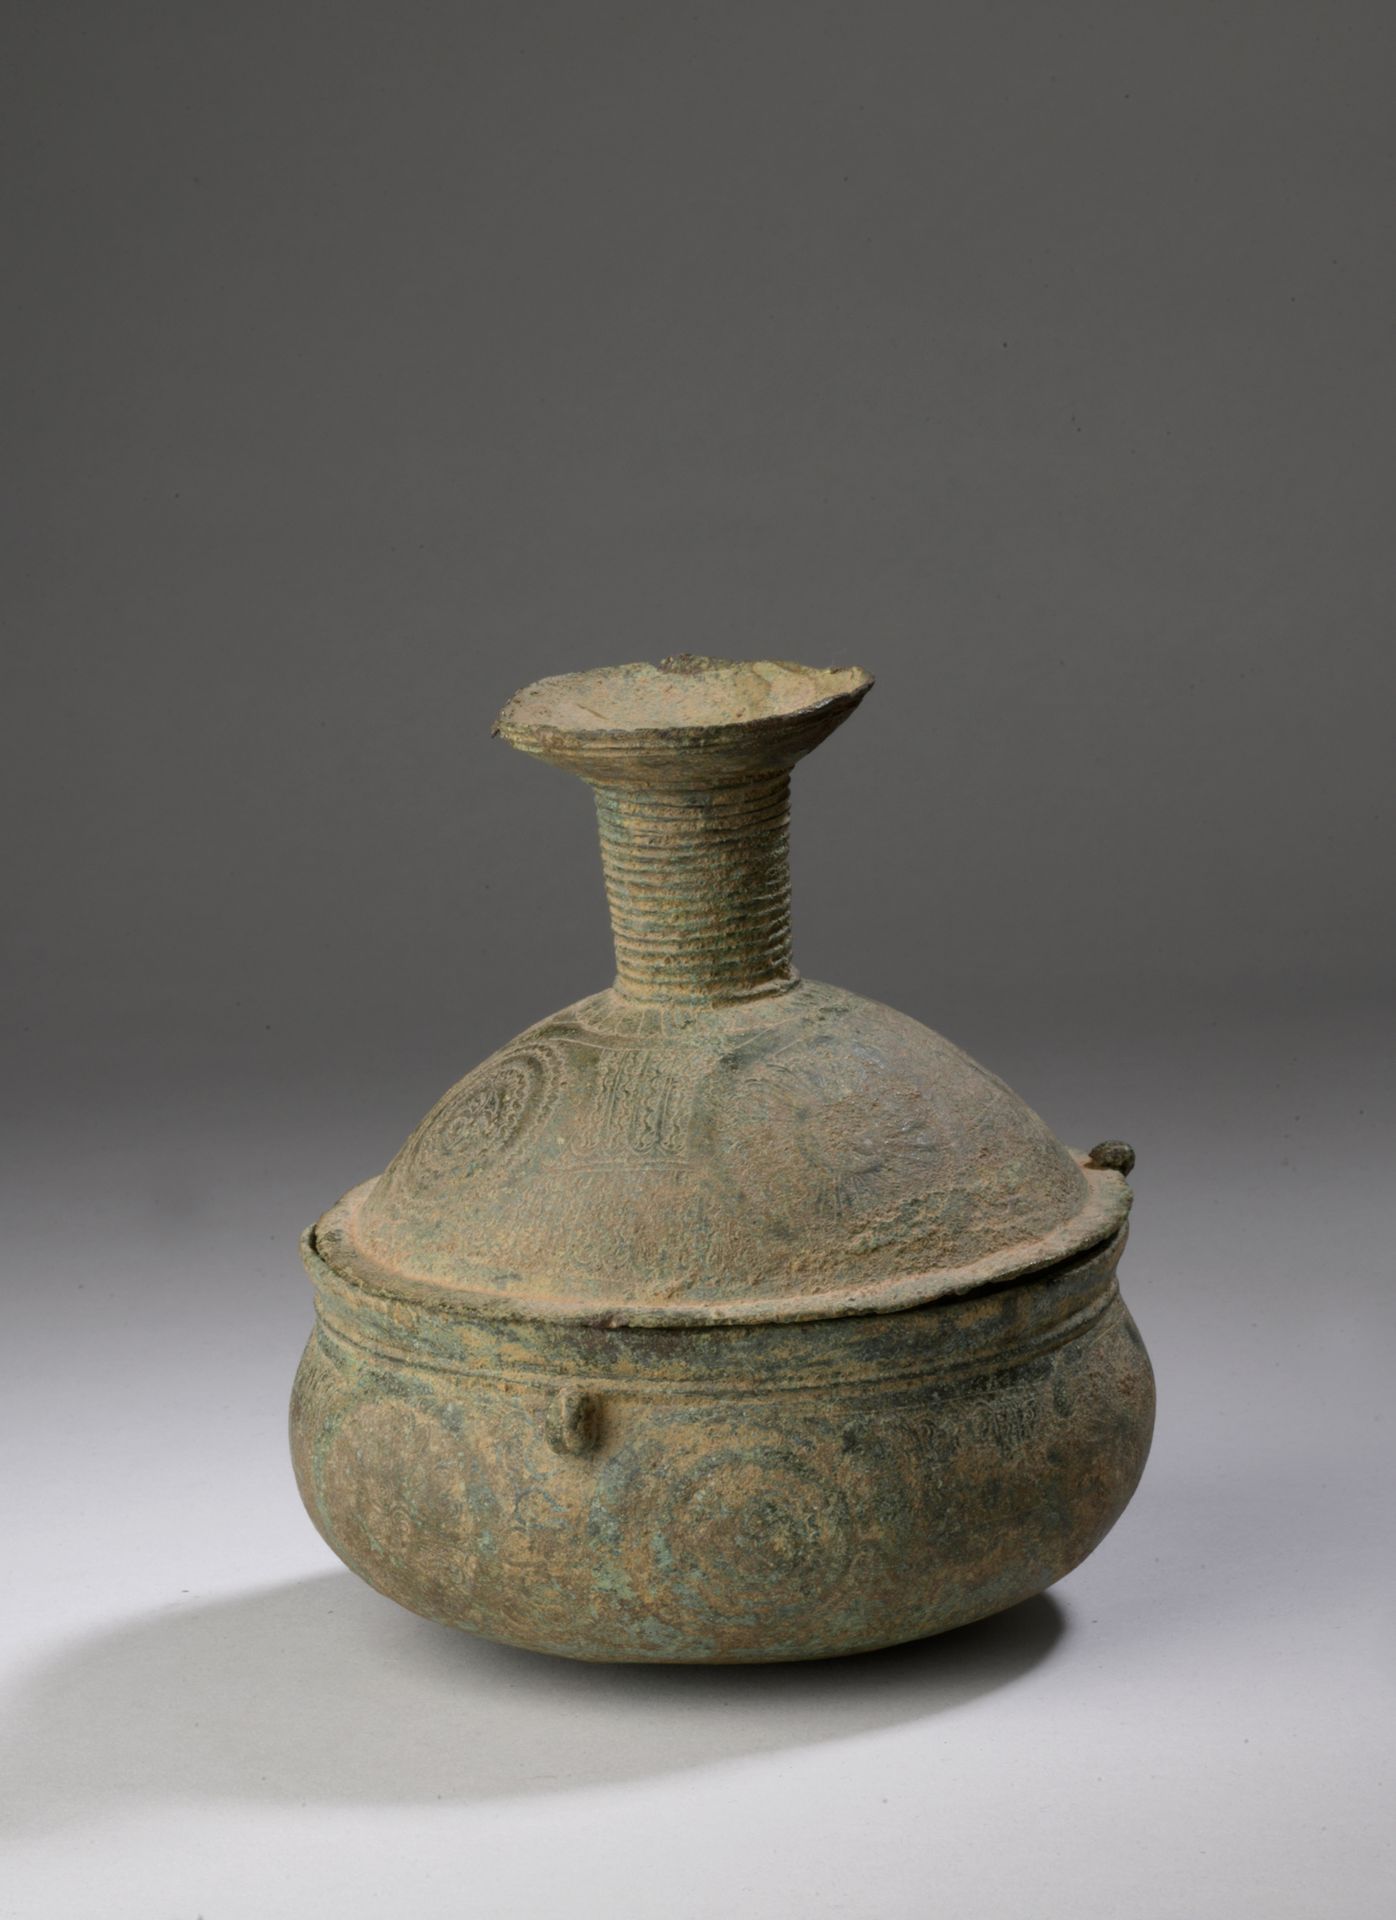 Null KUDUO OR FOROWA ASHANTI, Ghana

Copper alloy with excavation patina.

H. 15&hellip;